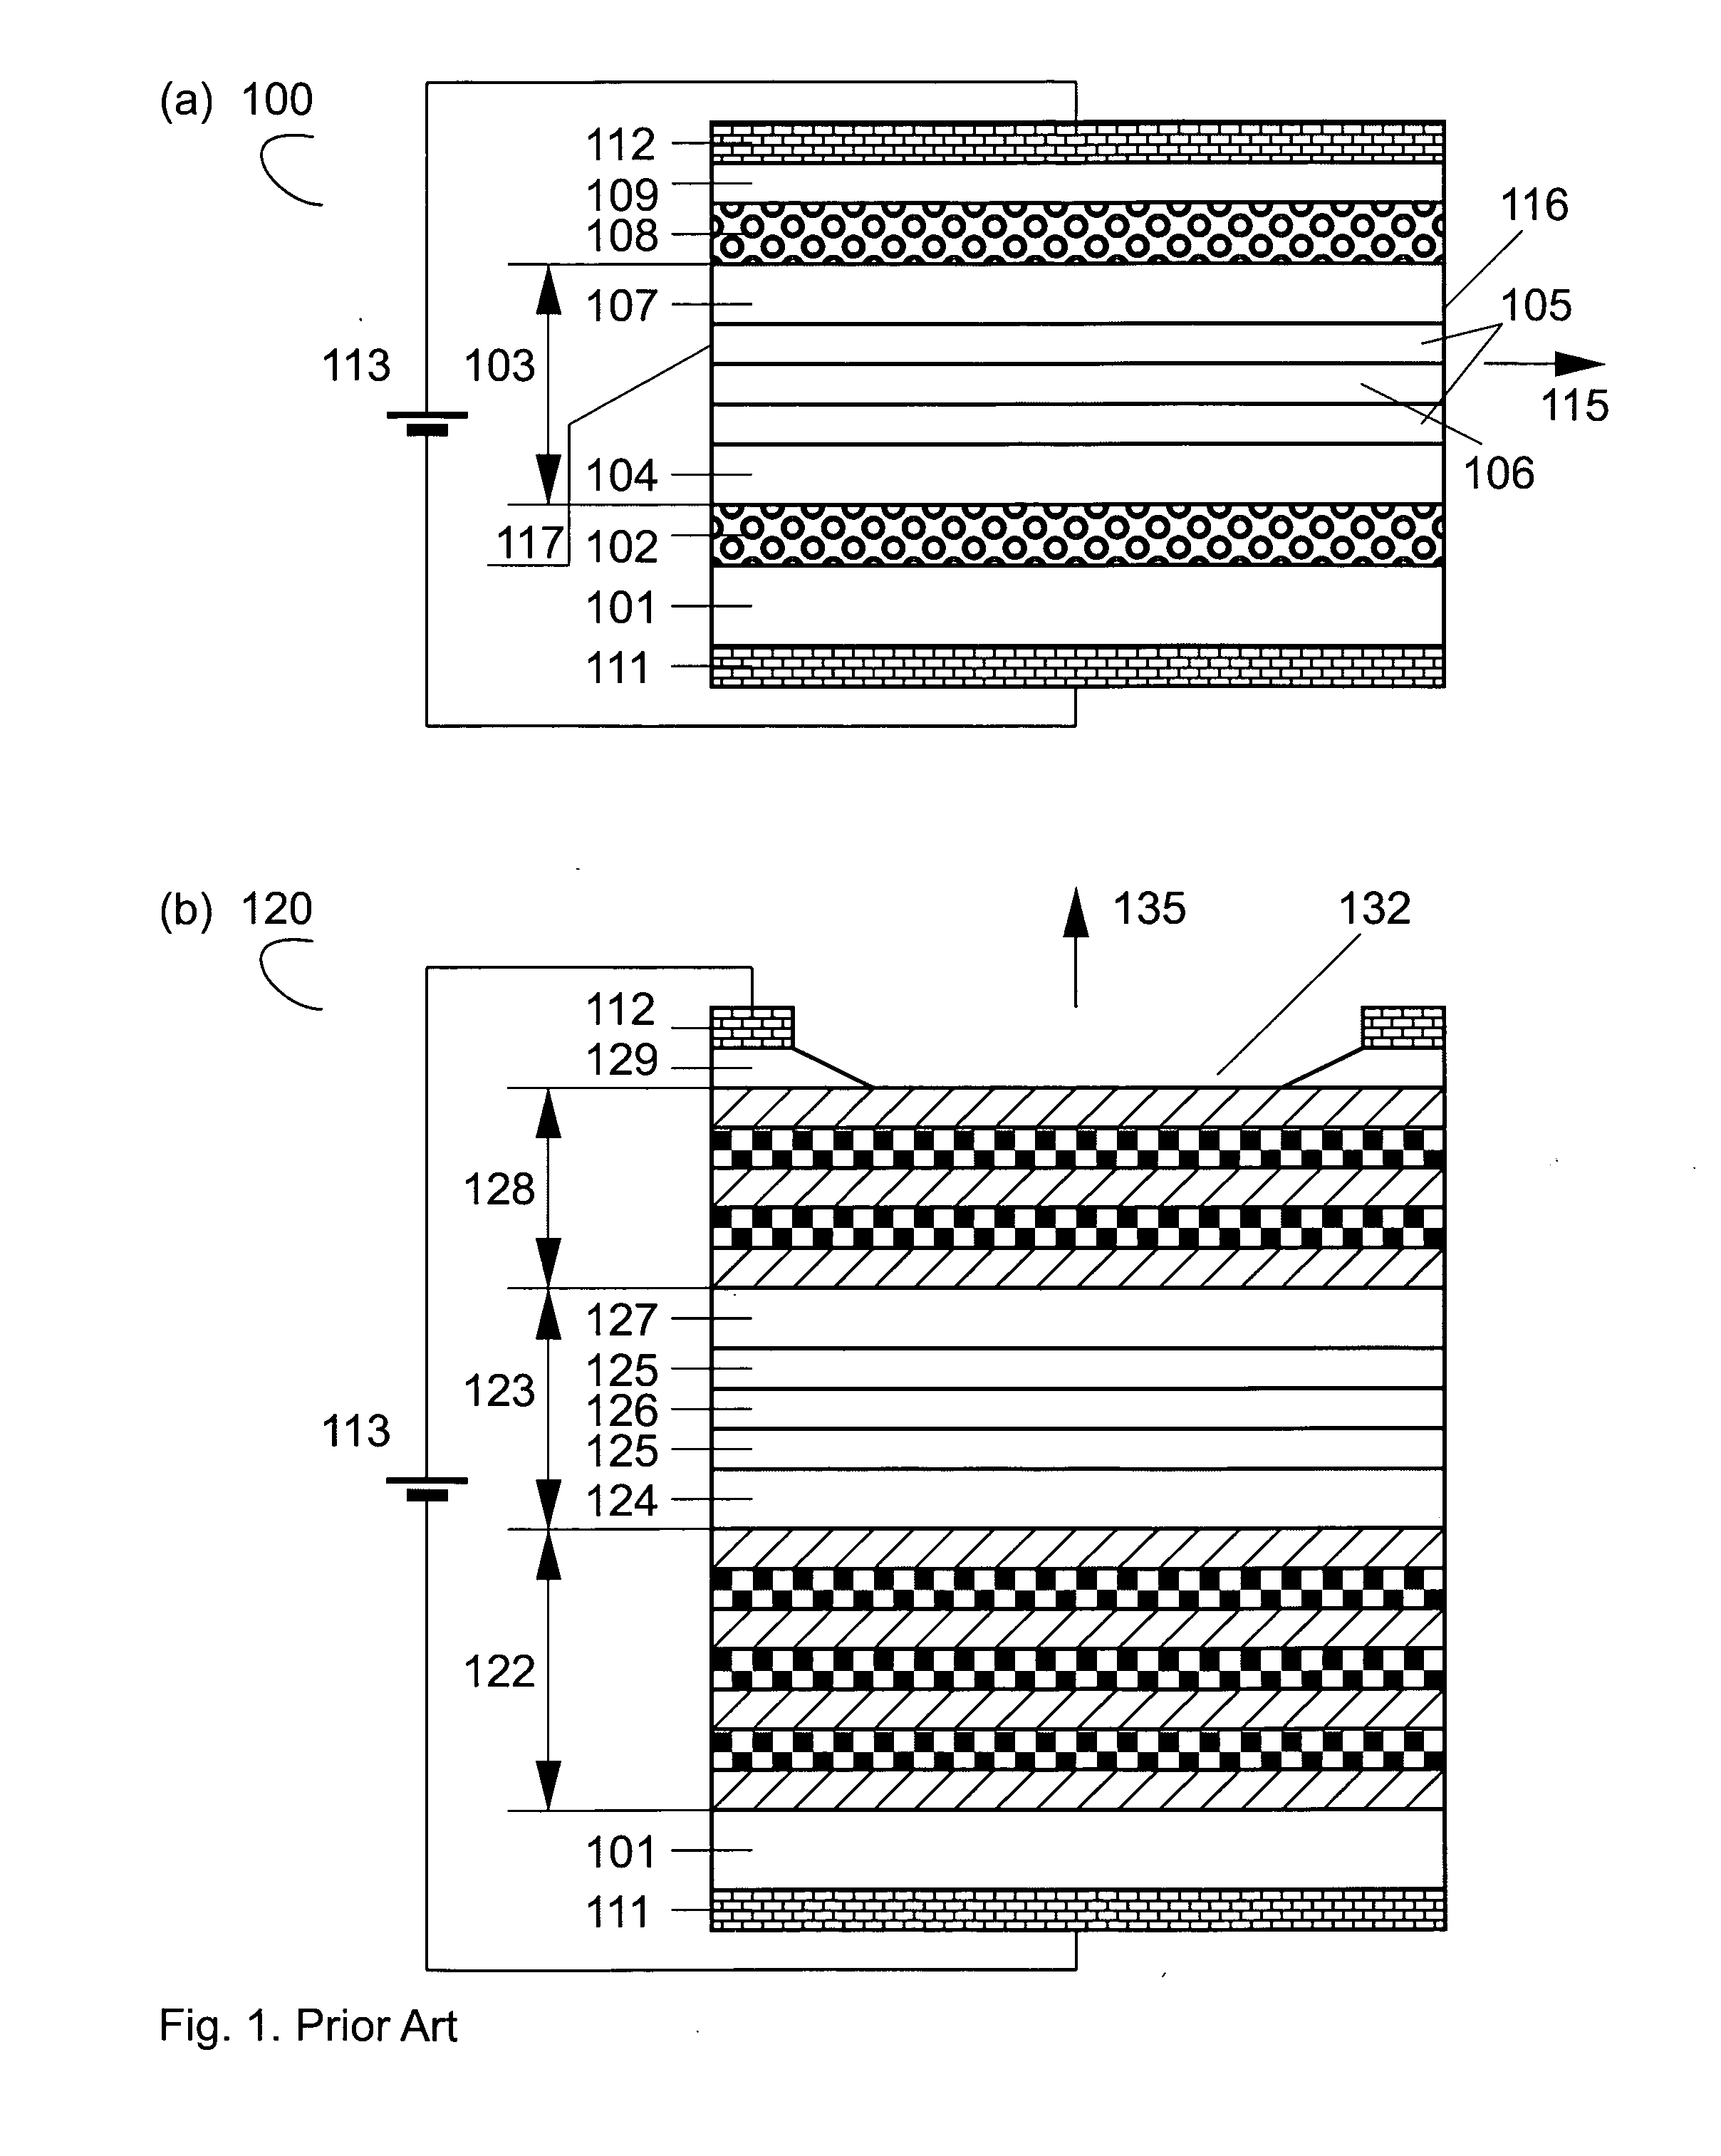 Optoelectronic device incorporating an interference filter